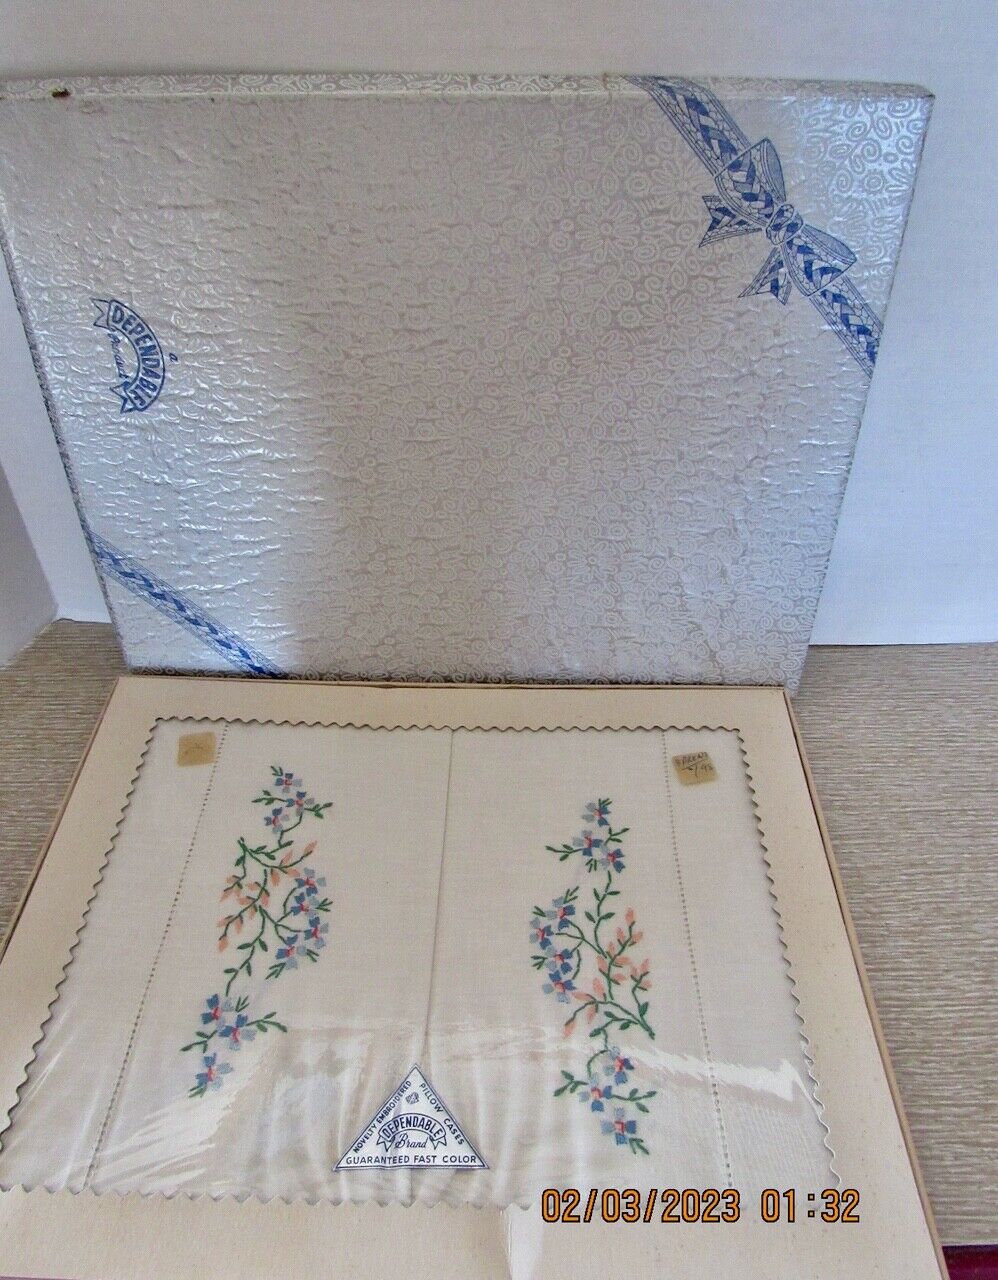 VINTAGE EMBROIDERED PILLOWCASES..DEPENDABLE BRAND..BOXED..NOS